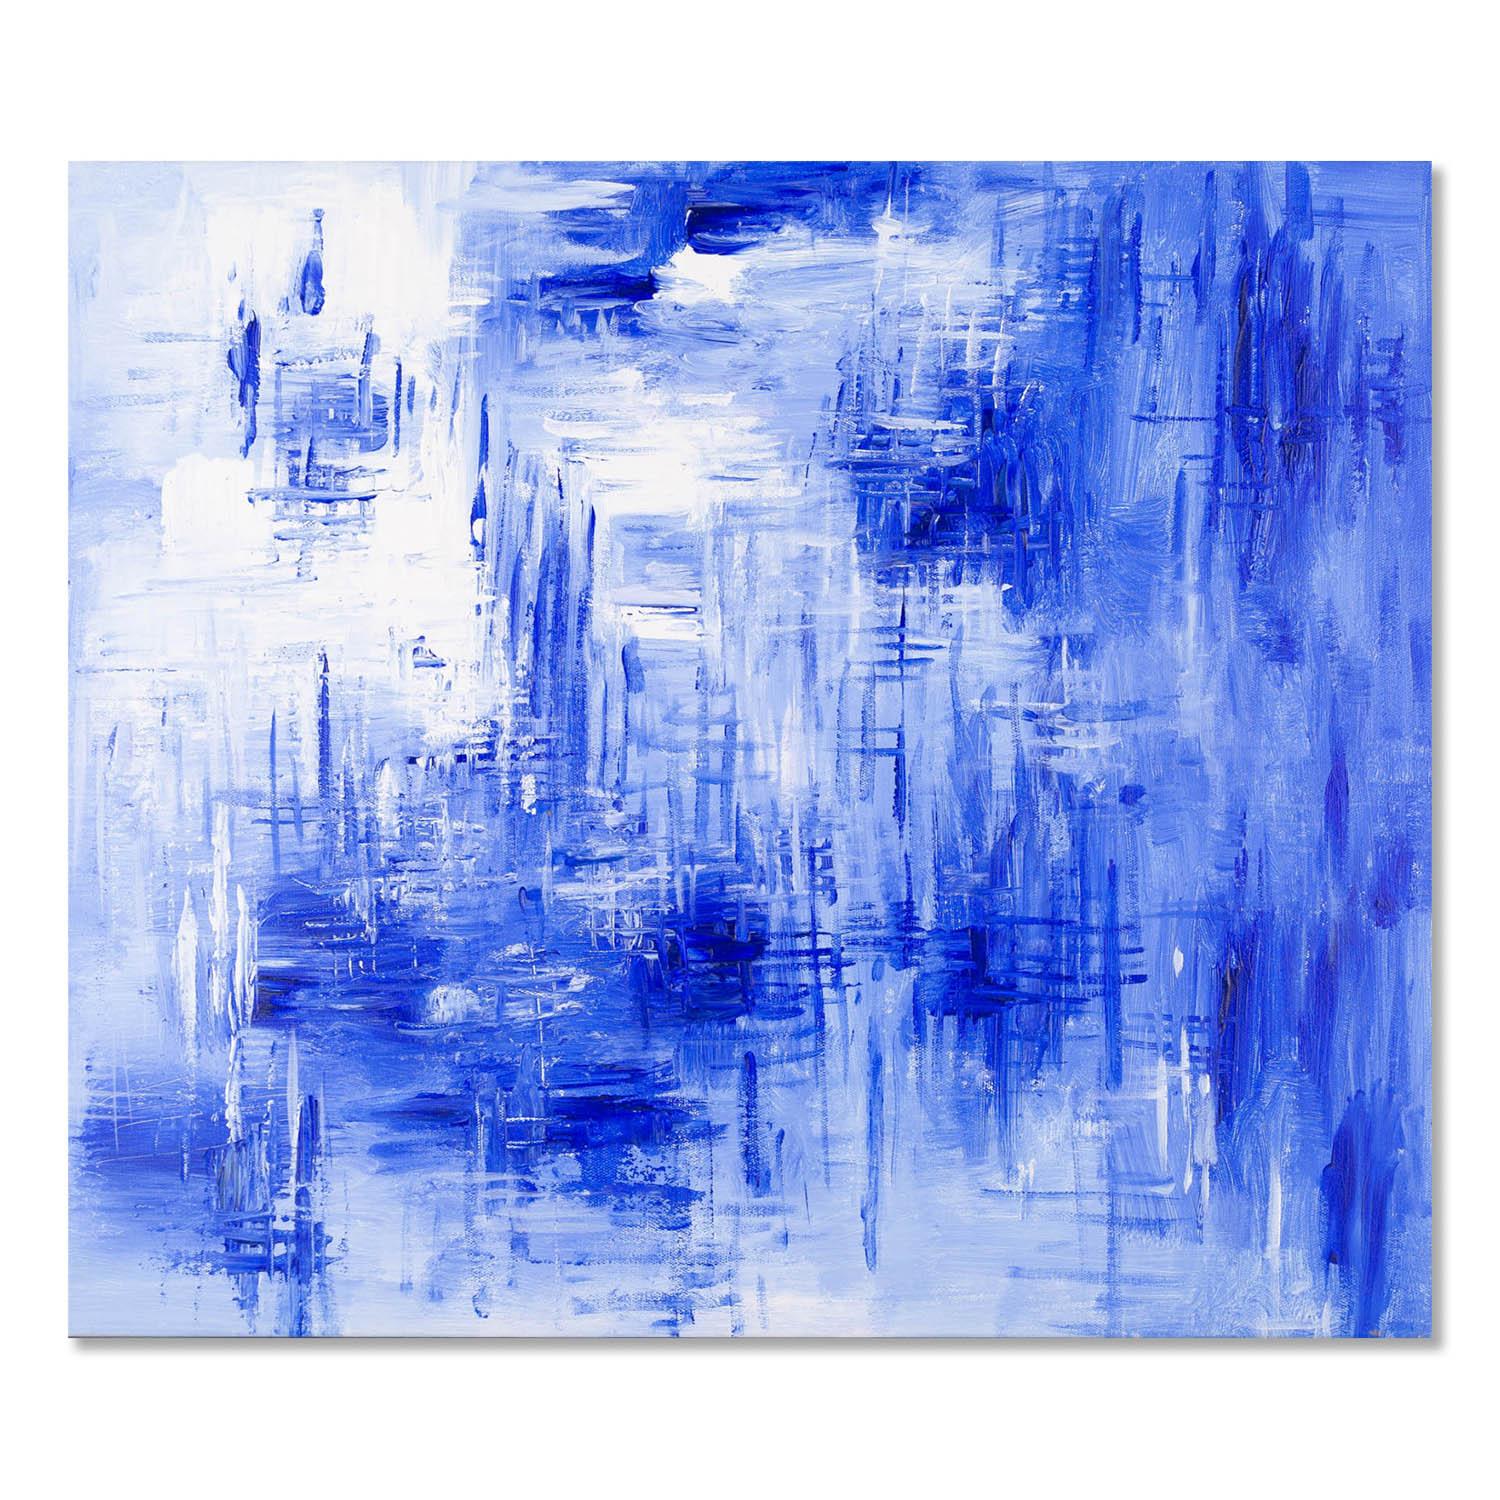  Title: White And Blue World
 Medium: Oil on canvas
 Size: 22 x 26 inches
 Frame: Framing options available!
 Condition: The painting appears to be in excellent condition.
 
 Year: 2000 Circa
 Artist: Wei Zhang
 Signature: Unsigned
 Signature